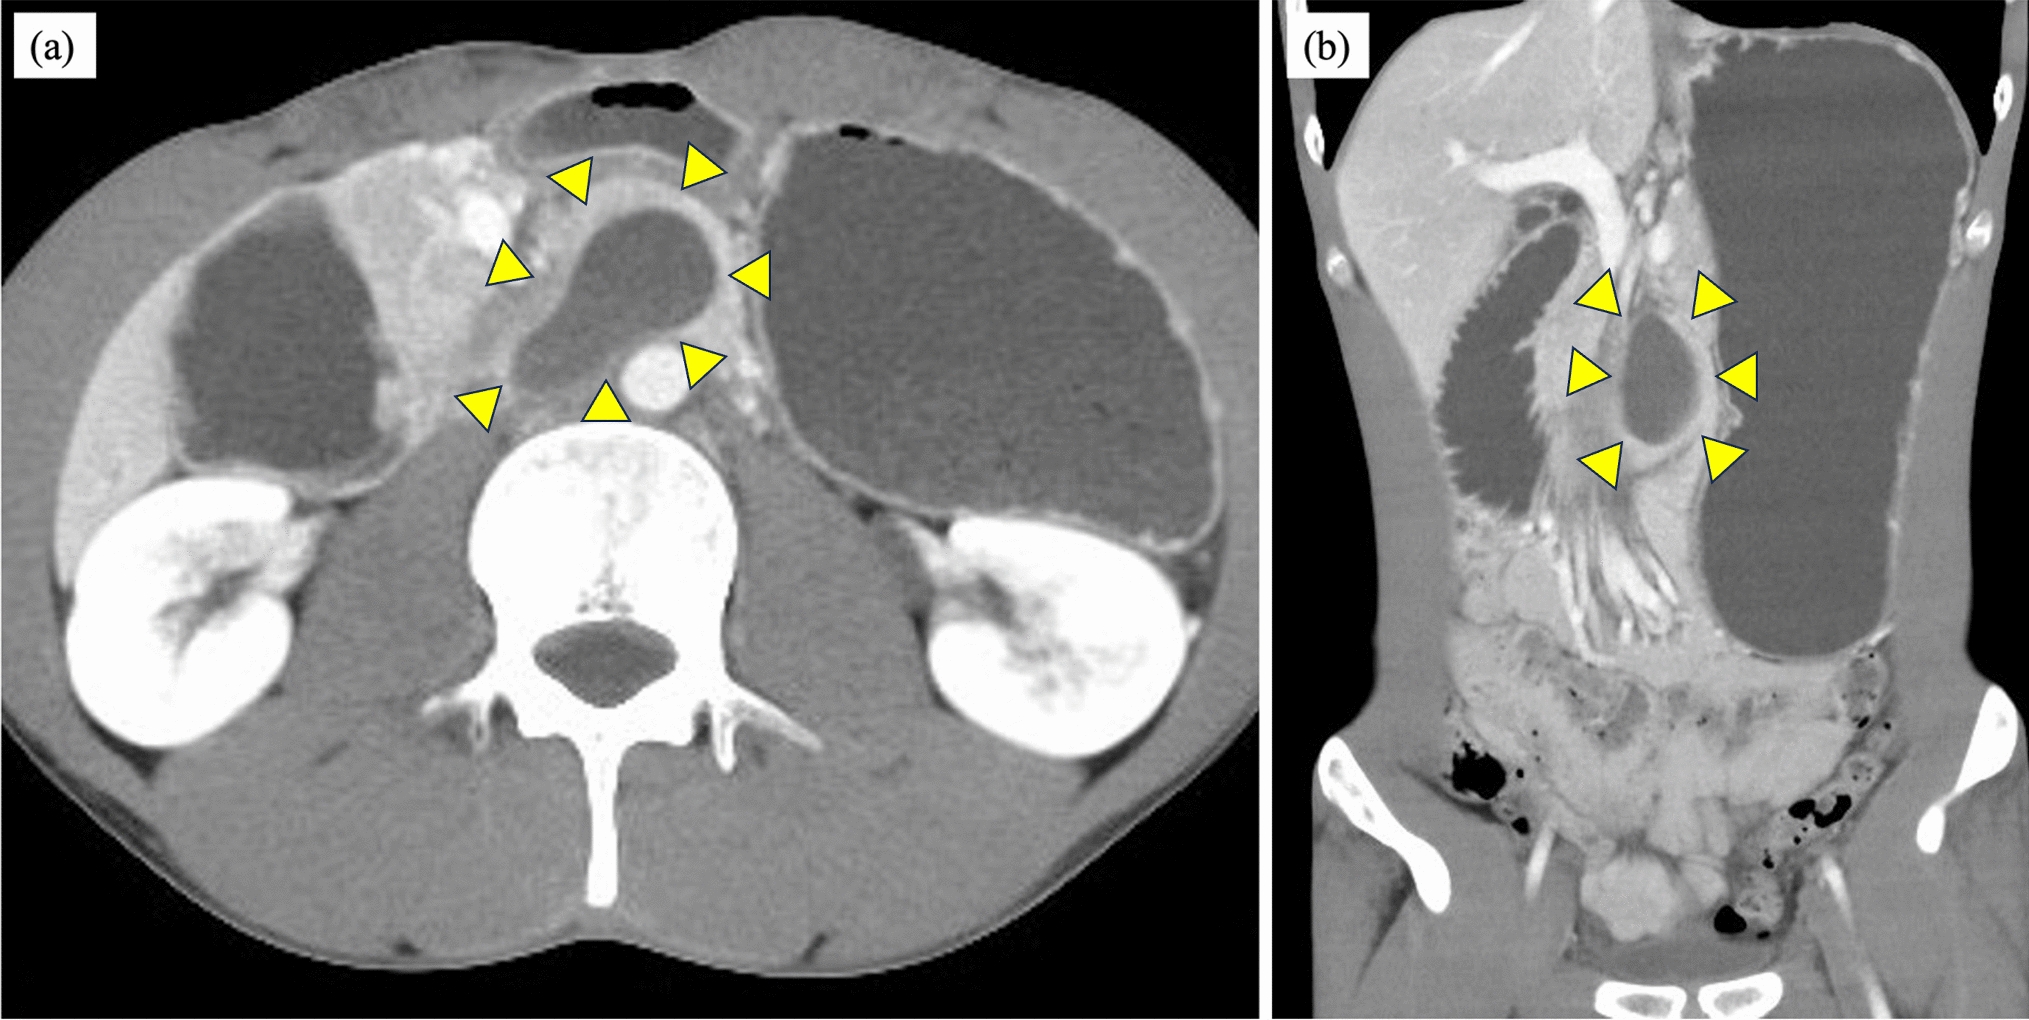 Symptomatic duodenal intramural hematoma caused by weight training: a report of two cases